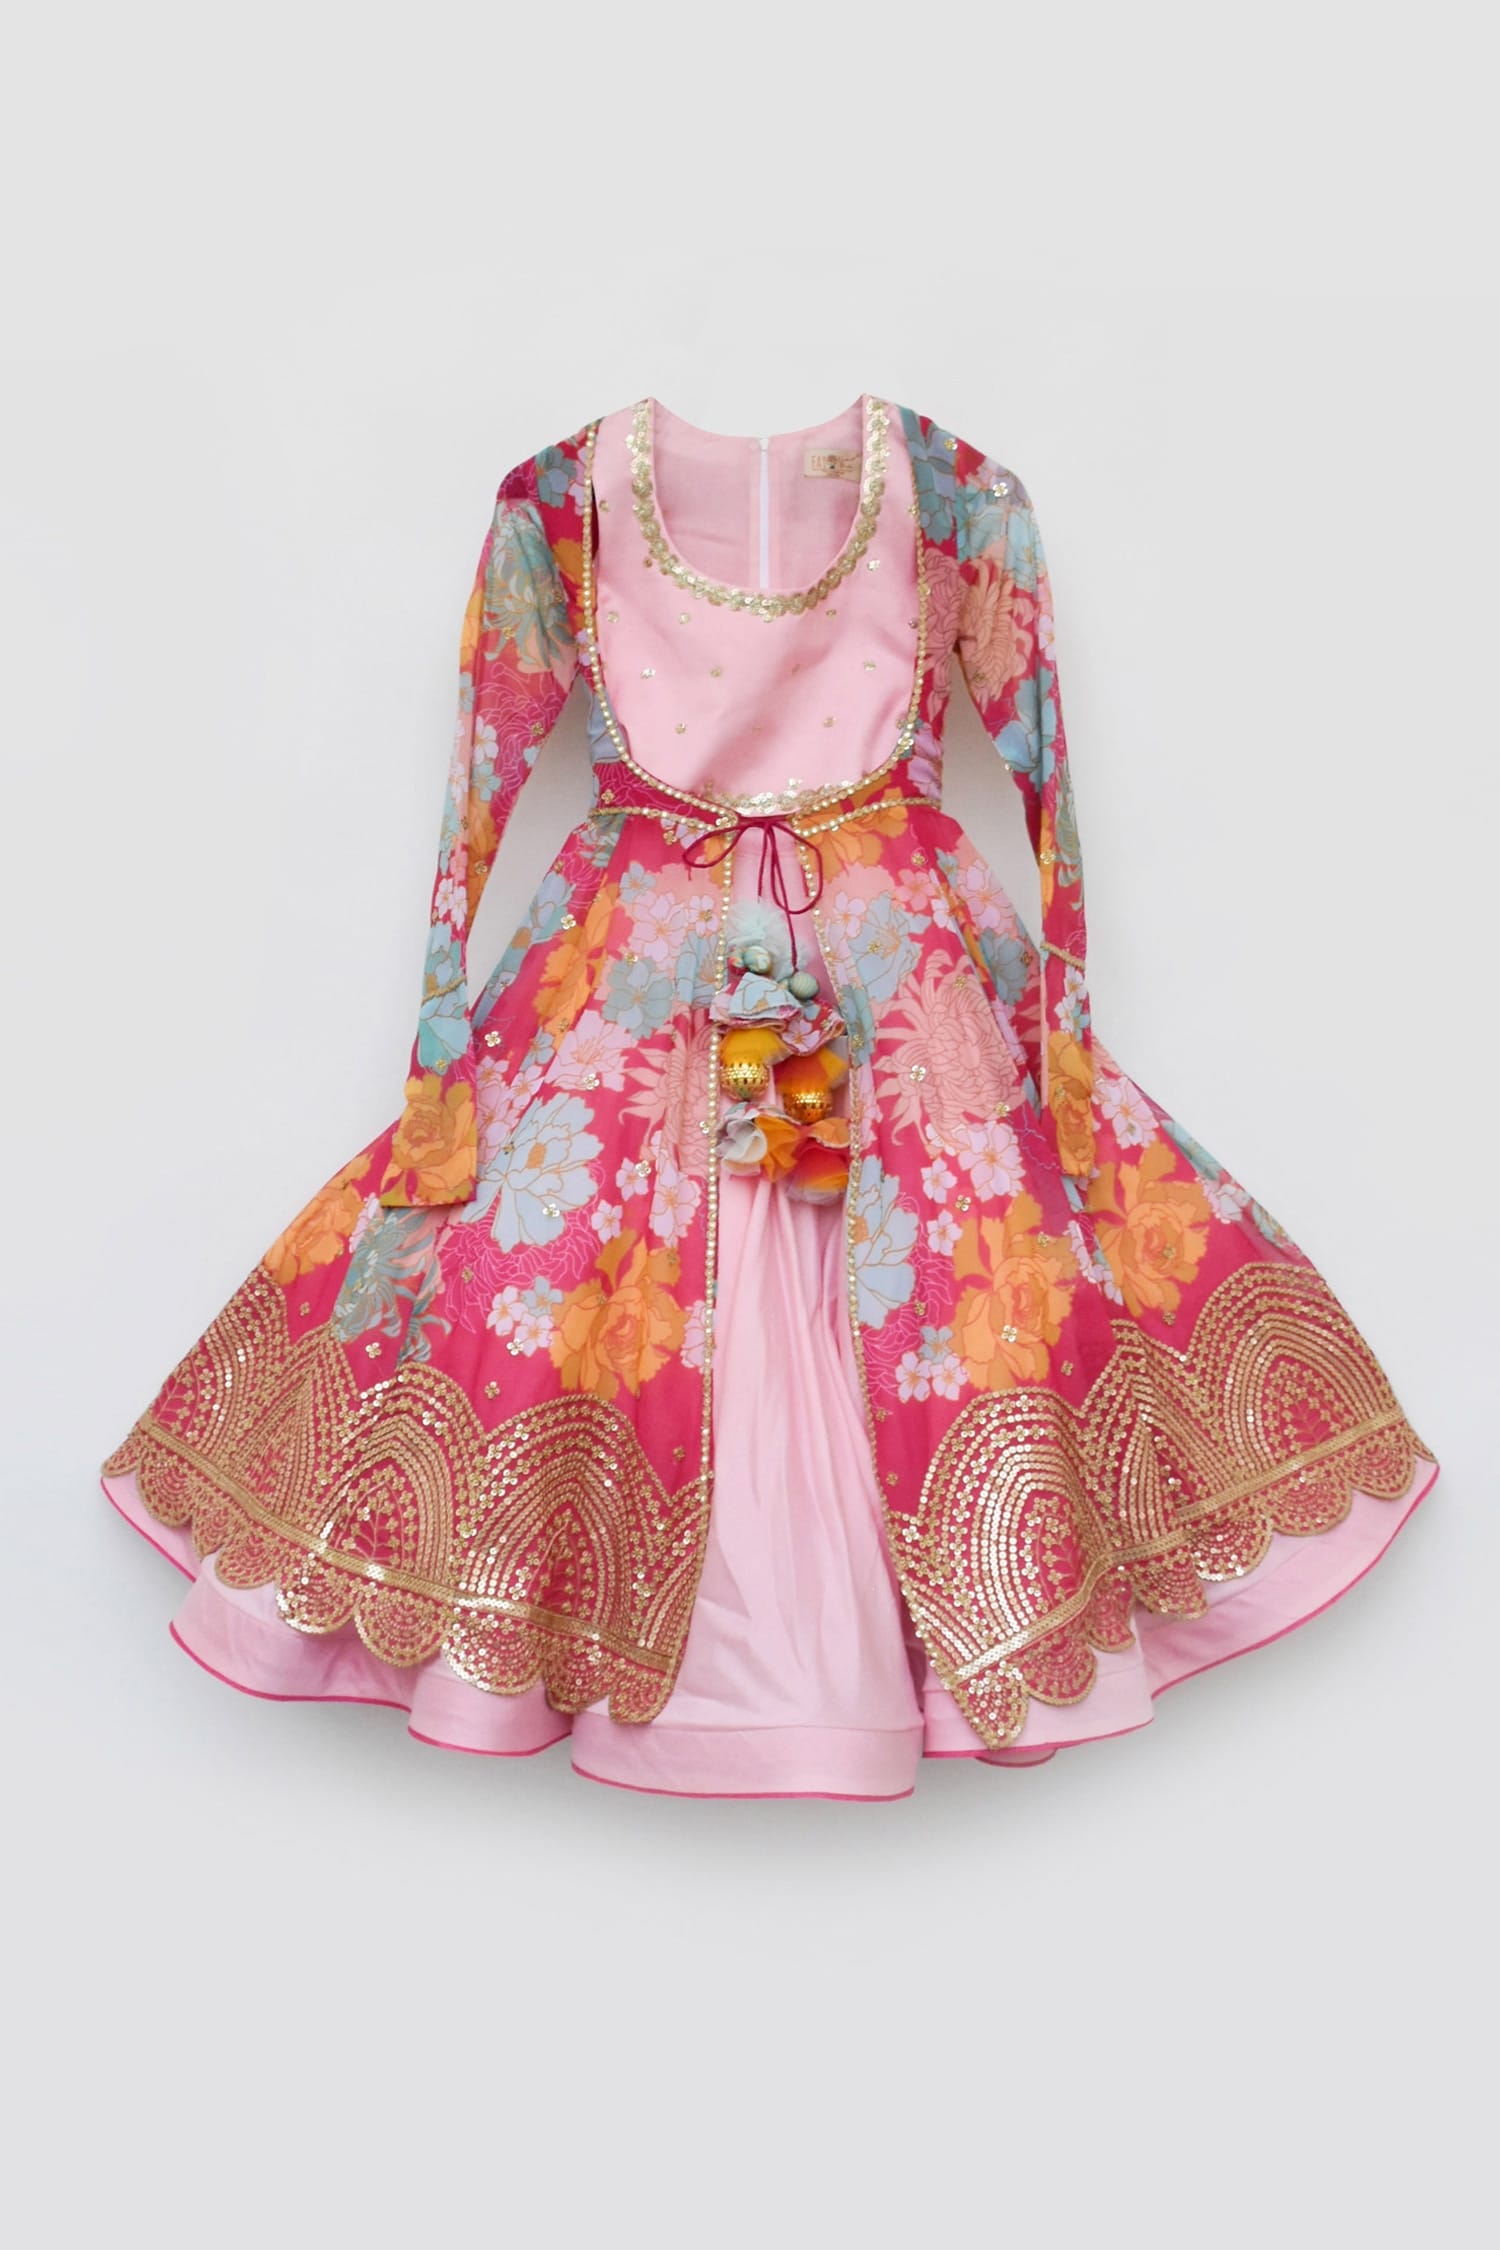 Indian Jacket Style Dresses Long Frocks | Printed gowns, Gown with jacket,  Fashion dresses